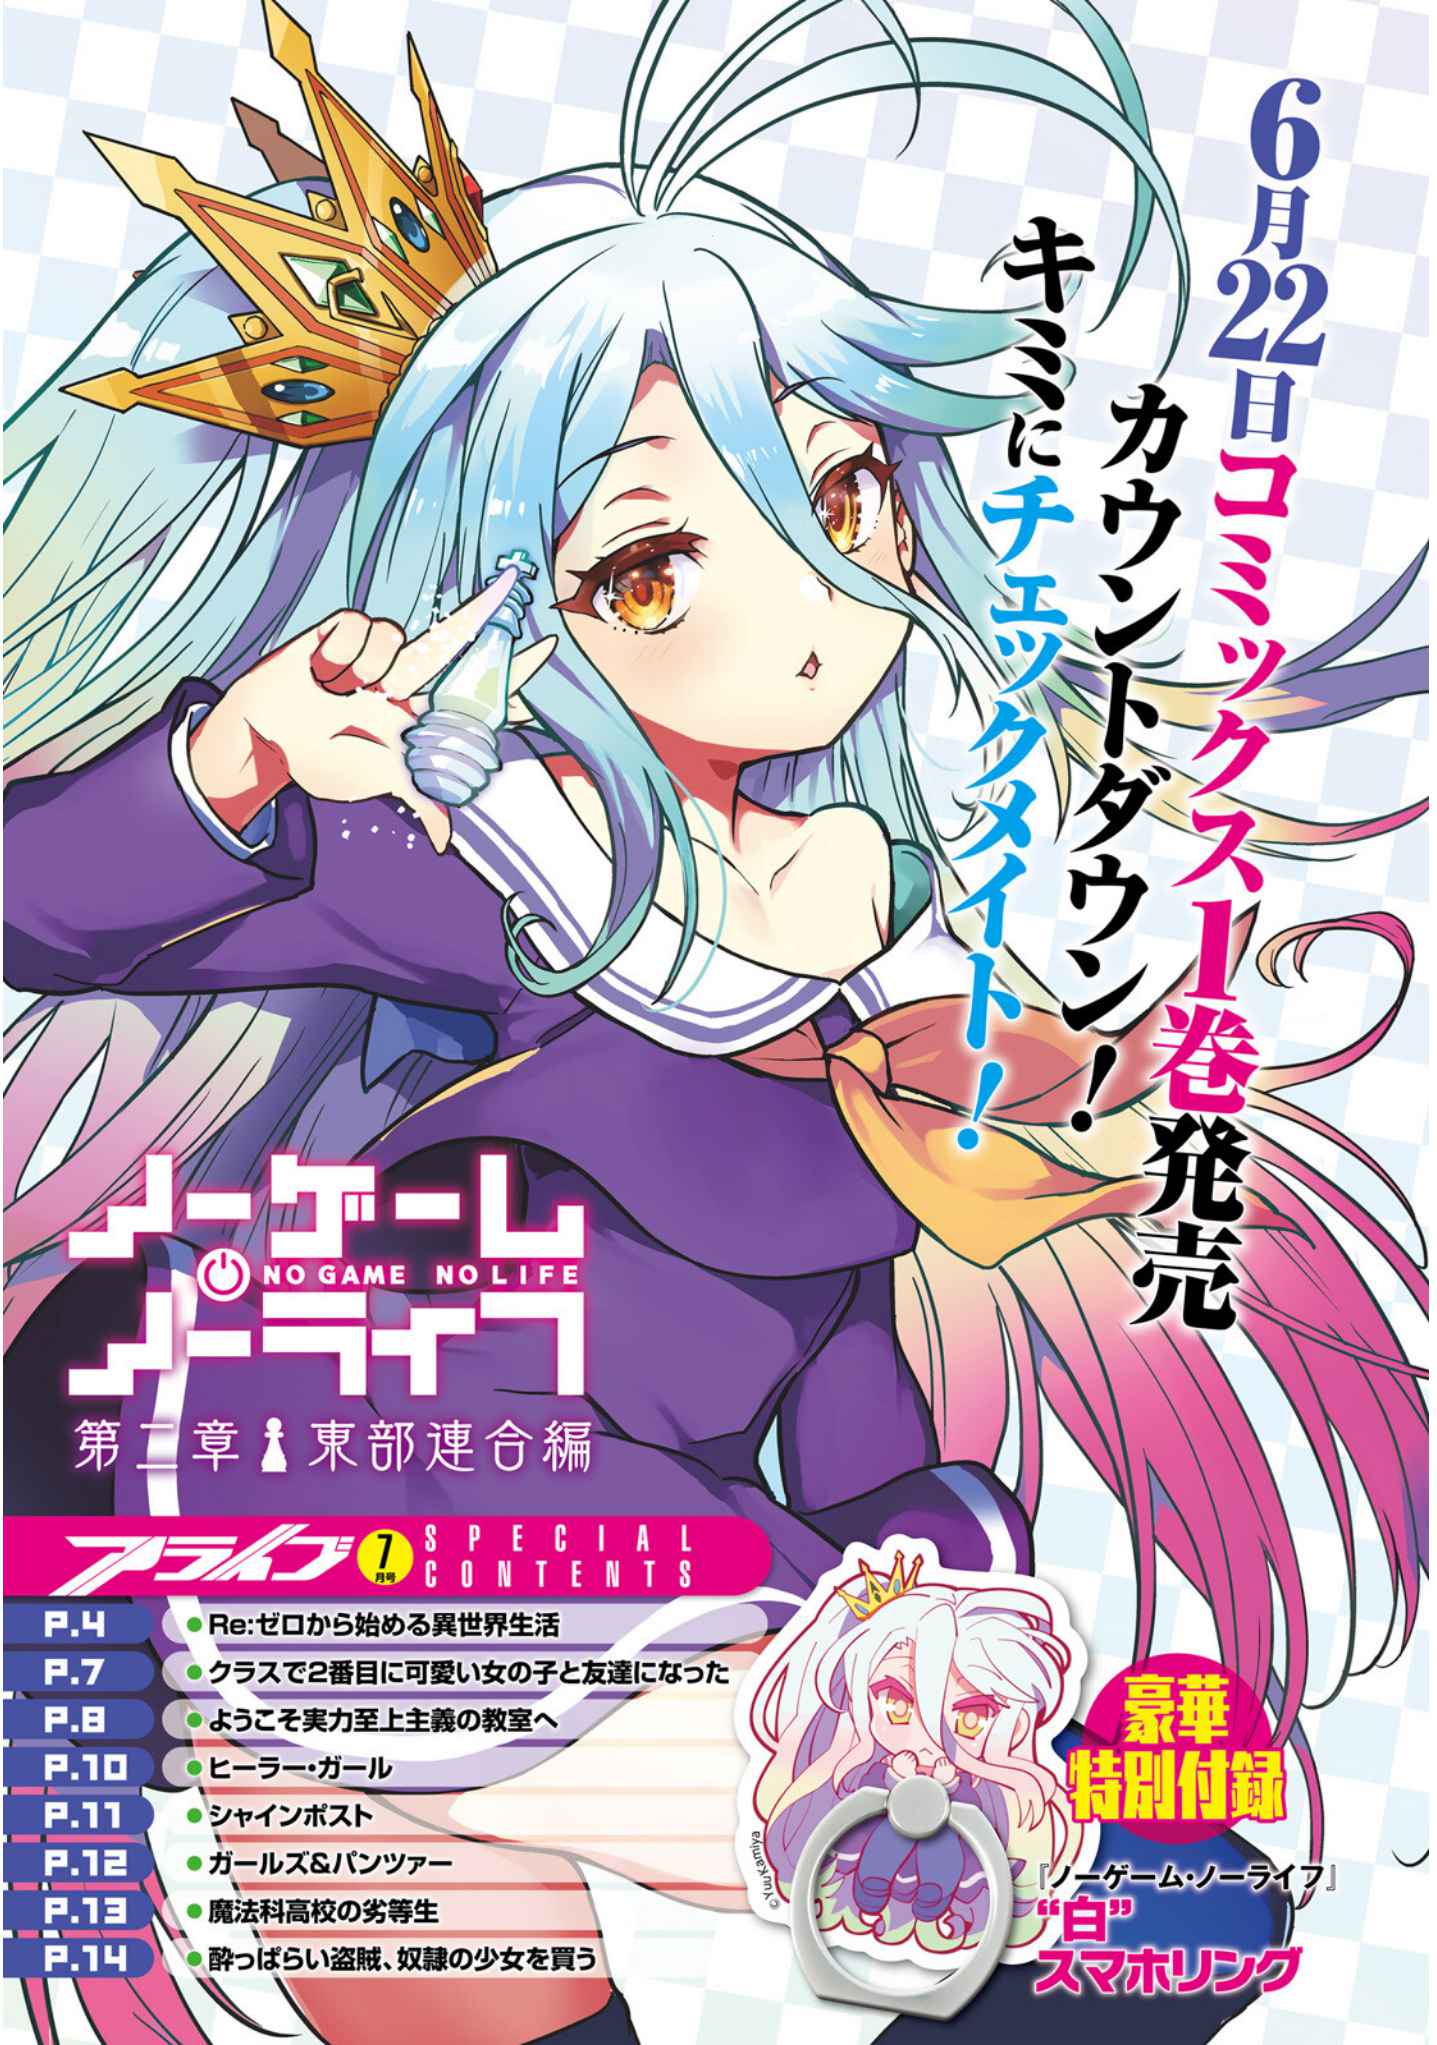 No Game No Life Manga Reveals Eastern Union Arc Cover for First Volume